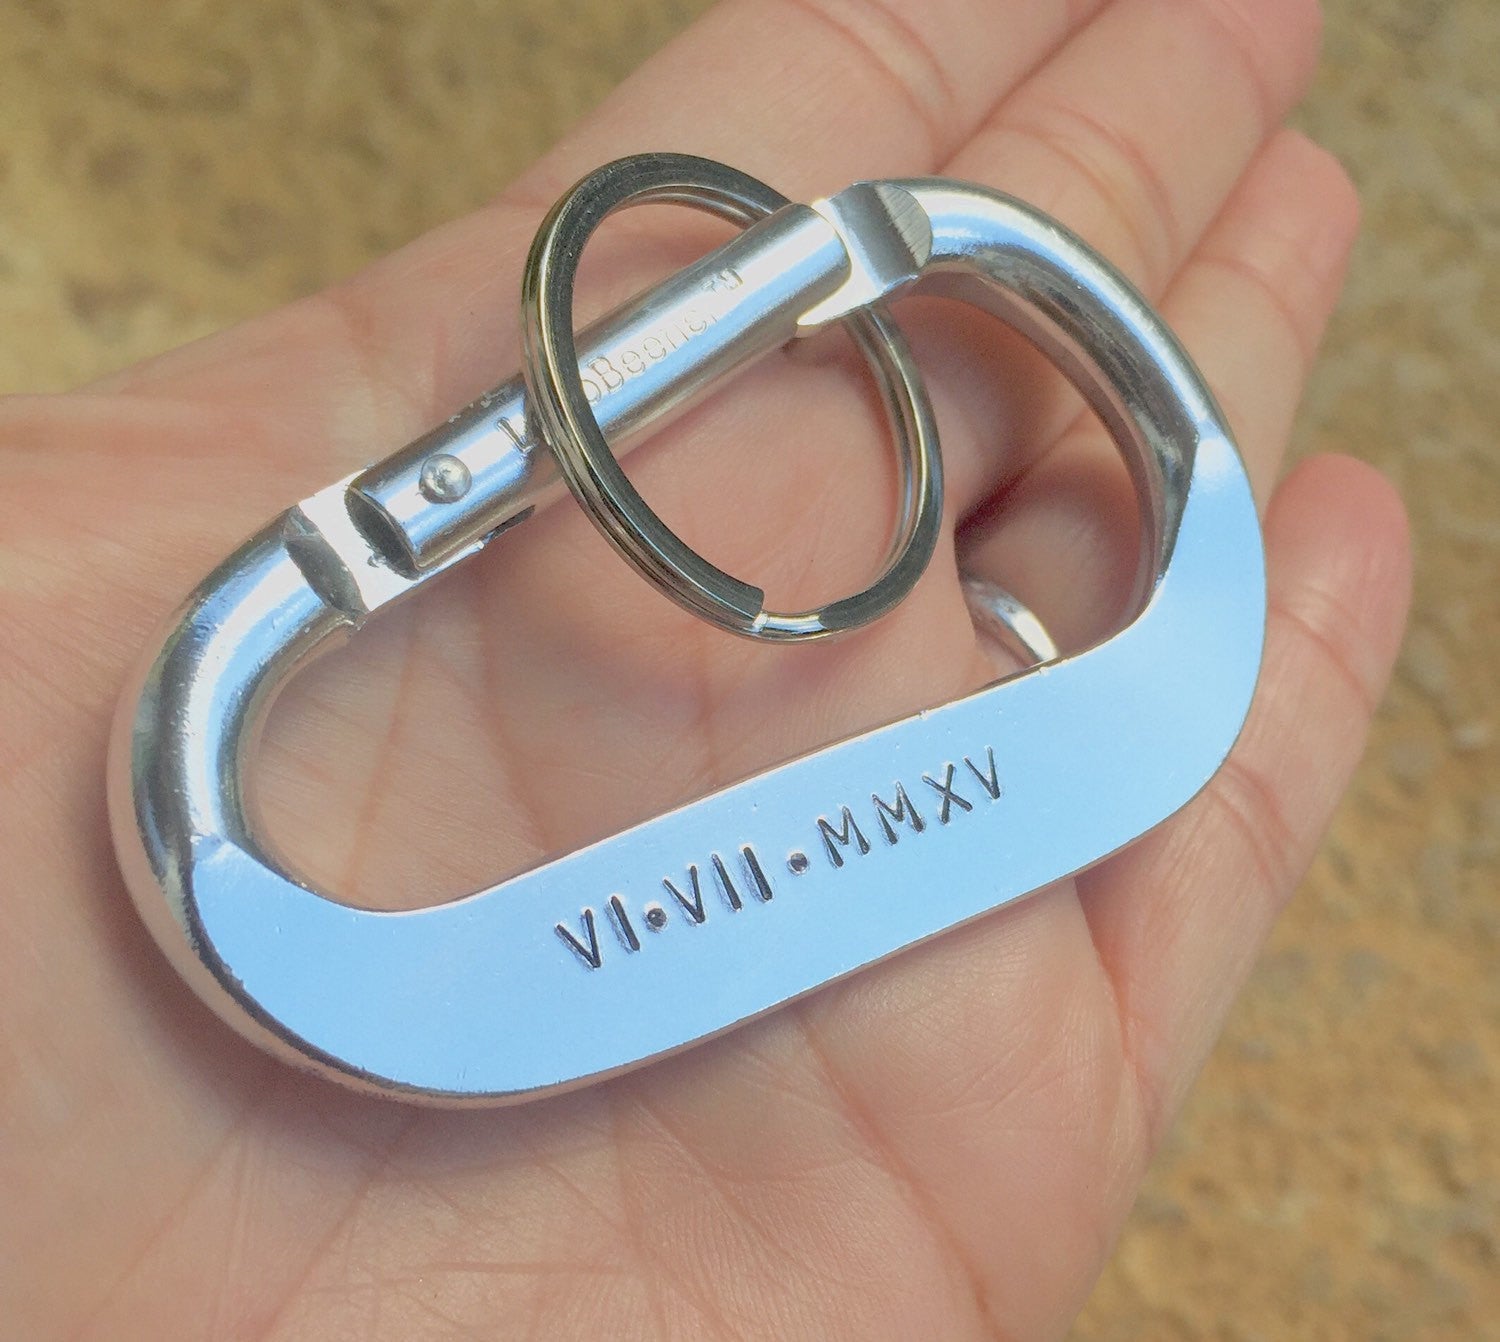 Personalized Carabiner, Carabiner, Hand Stamped Carabiner Featured In US Weekly - Natashaaloha, jewelry, bracelets, necklace, keychains, fishing lures, gifts for men, charms, personalized, 